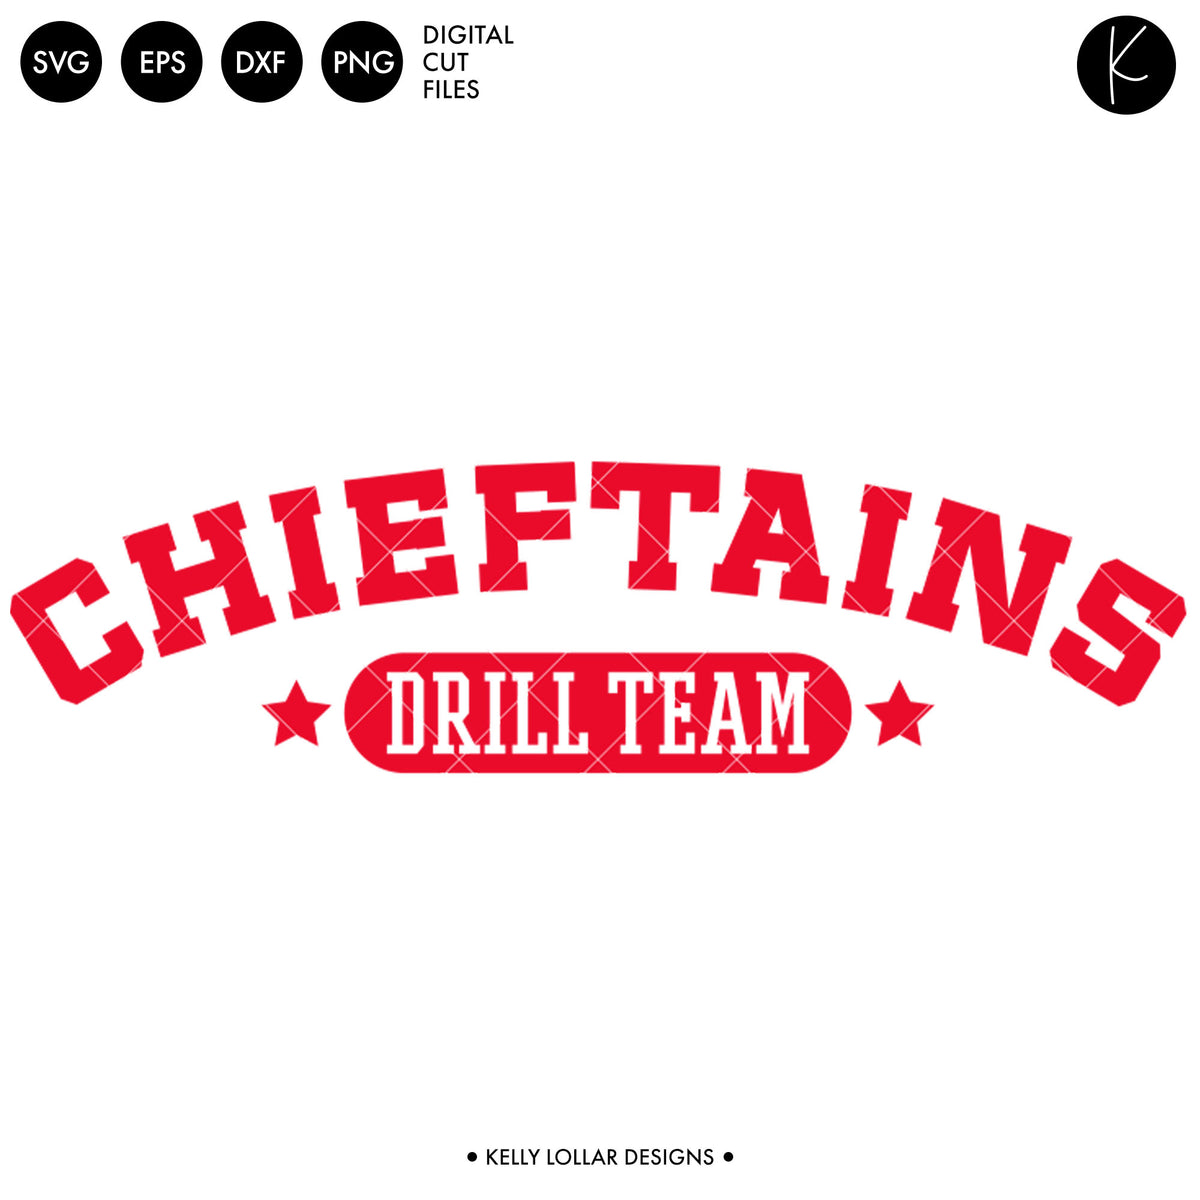 Chieftains Drill Bundle | SVG DXF EPS PNG Cut Files